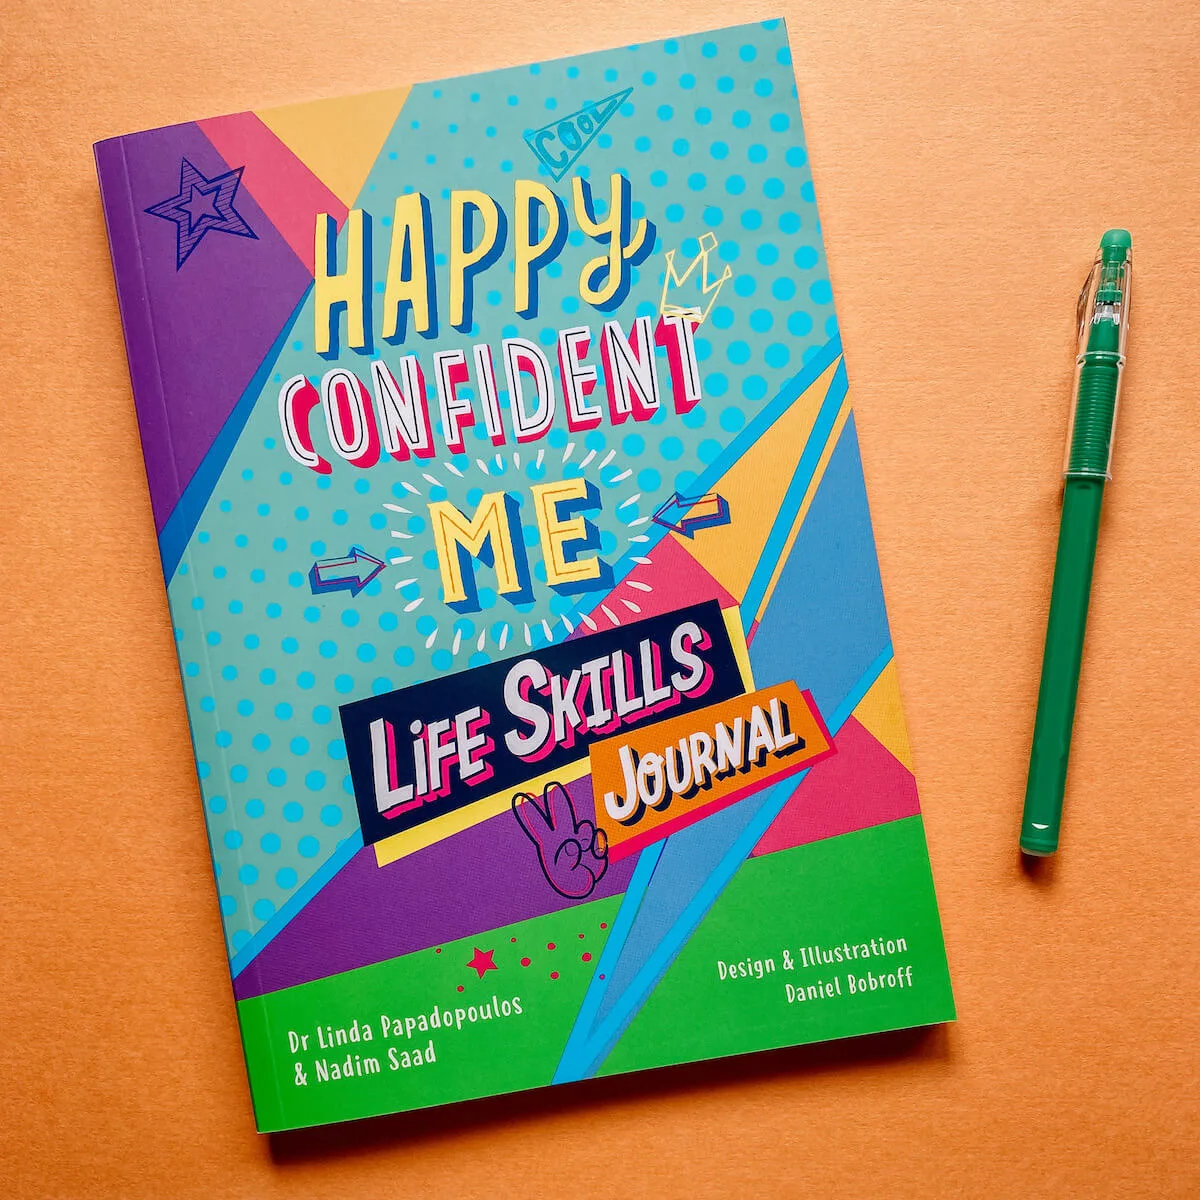 Happy confident me life skills journal on desk with pen